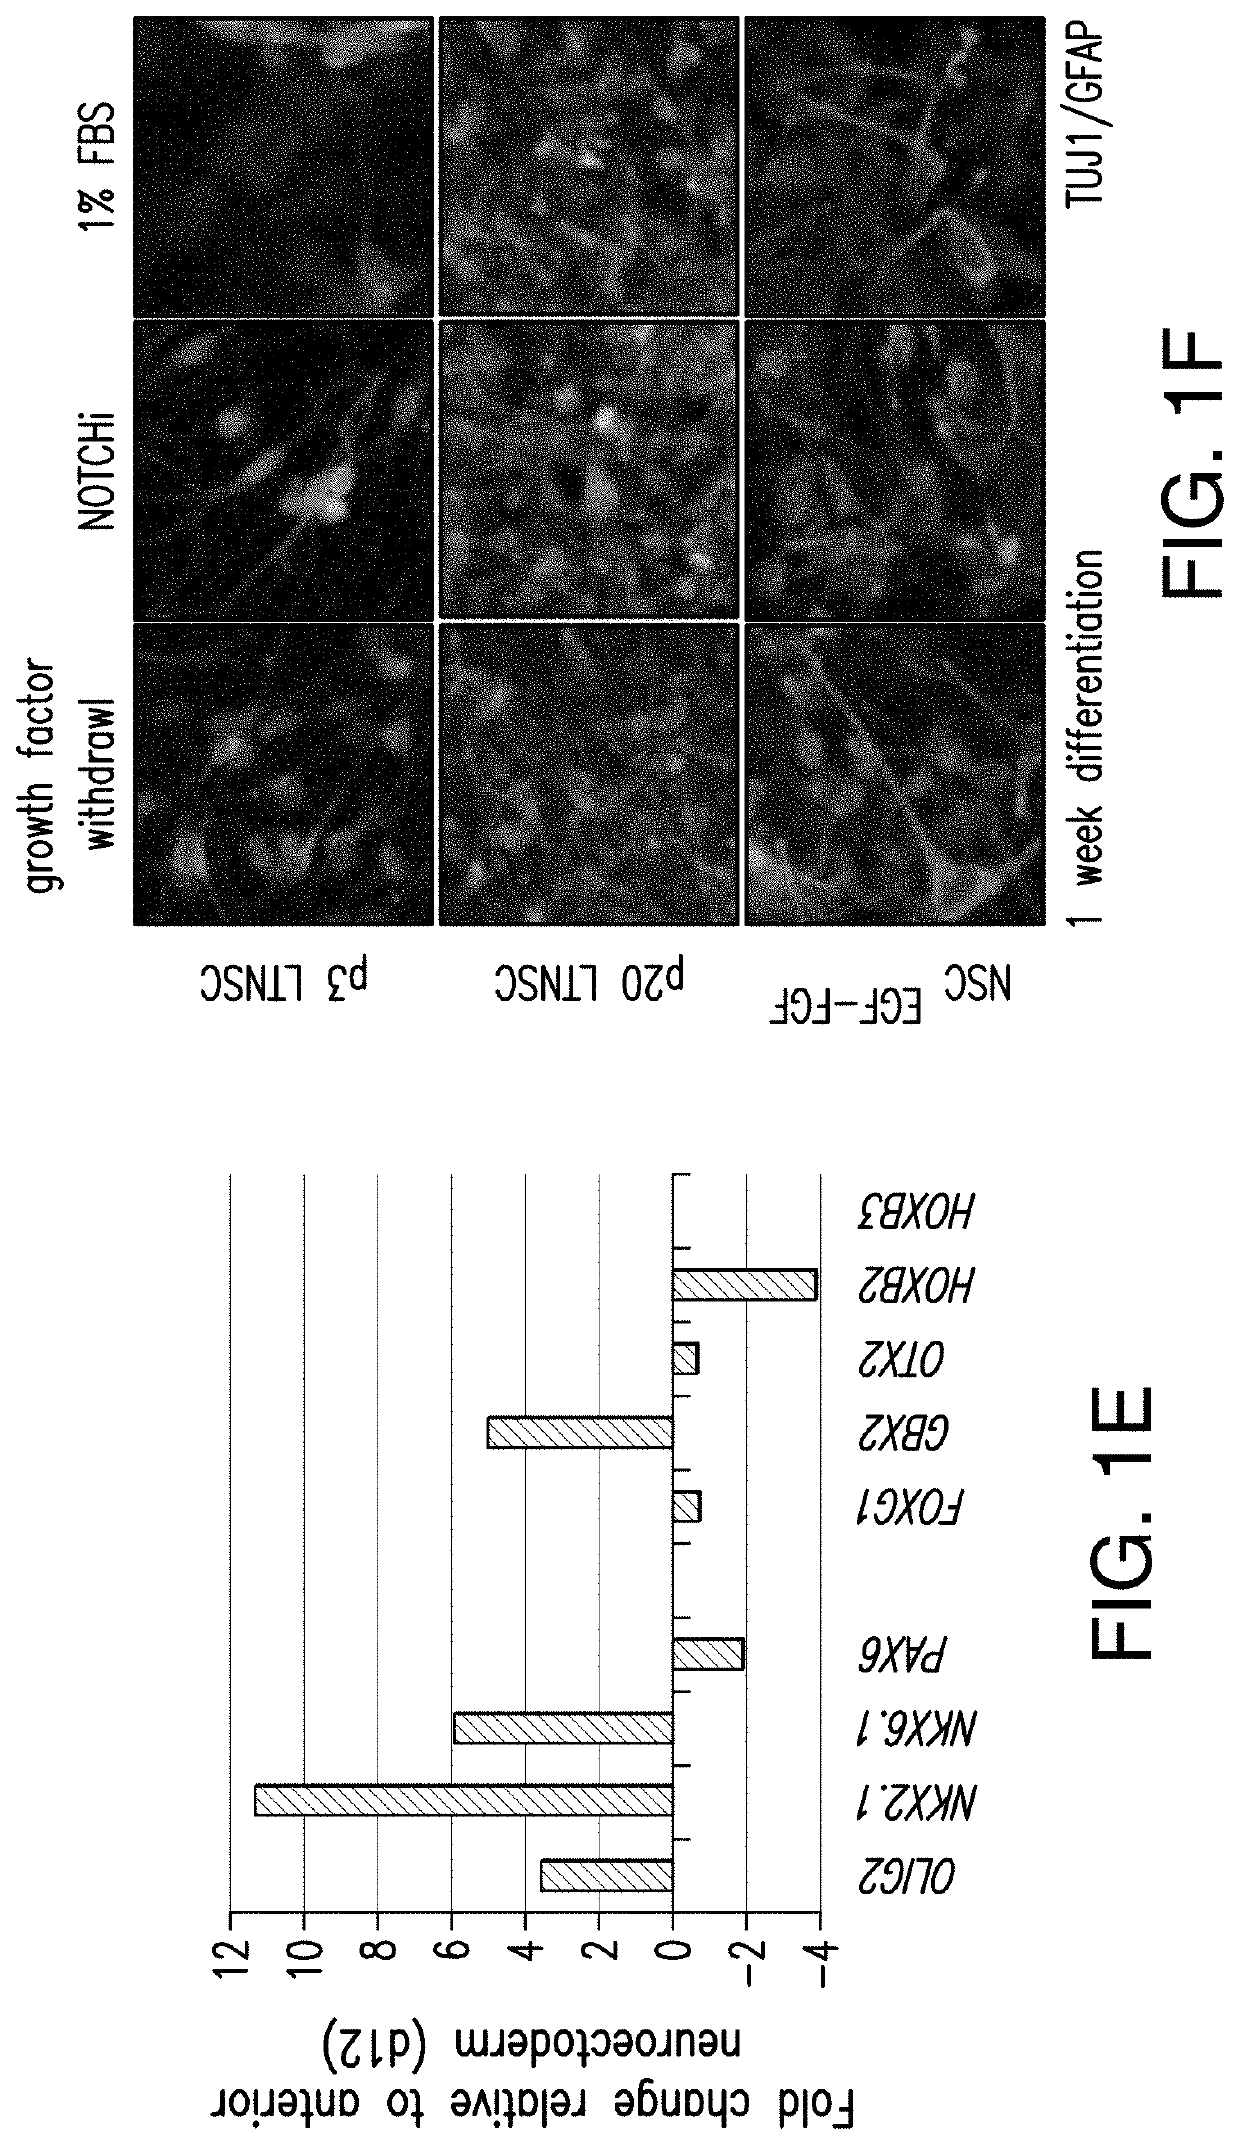 Stem cell-derived astrocytes, methods of making and methods of use